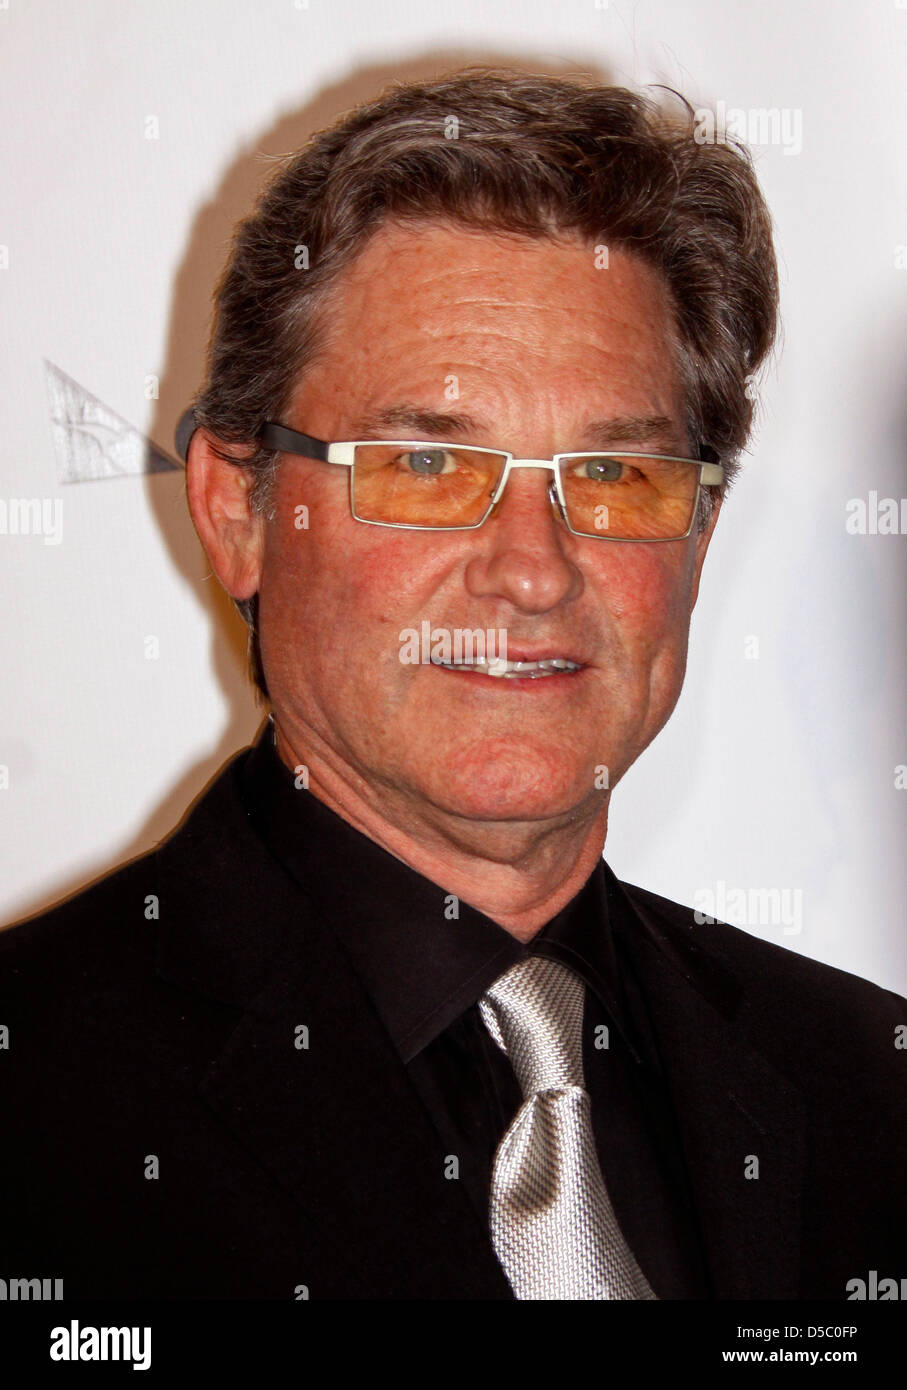 US actor Kurt Russell attends the 7th Annual Living Legends of Aviation Awards at Hotel Beverly Hilton in Los Angeles, CA., United States, 22 January 2010. Photo: Hubert Boesl Stock Photo